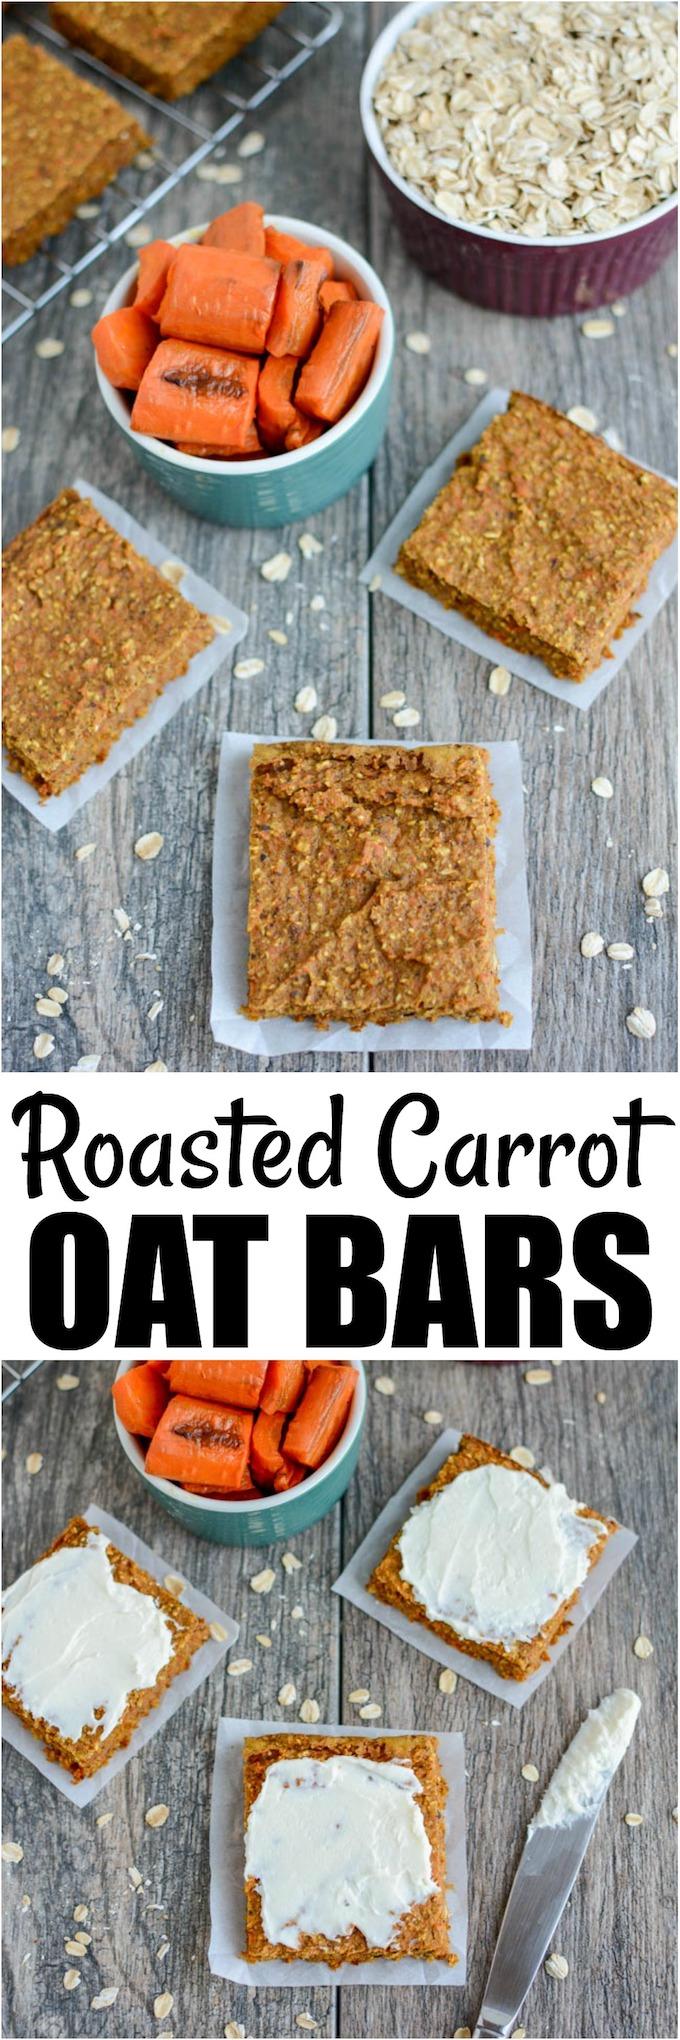 These Carrot Oat Bars make the perfect healthy snack. They're dense, chewy and easy to make in the blender. Plus they're kid-friendly and also make a great addition to breakfasts and lunches.